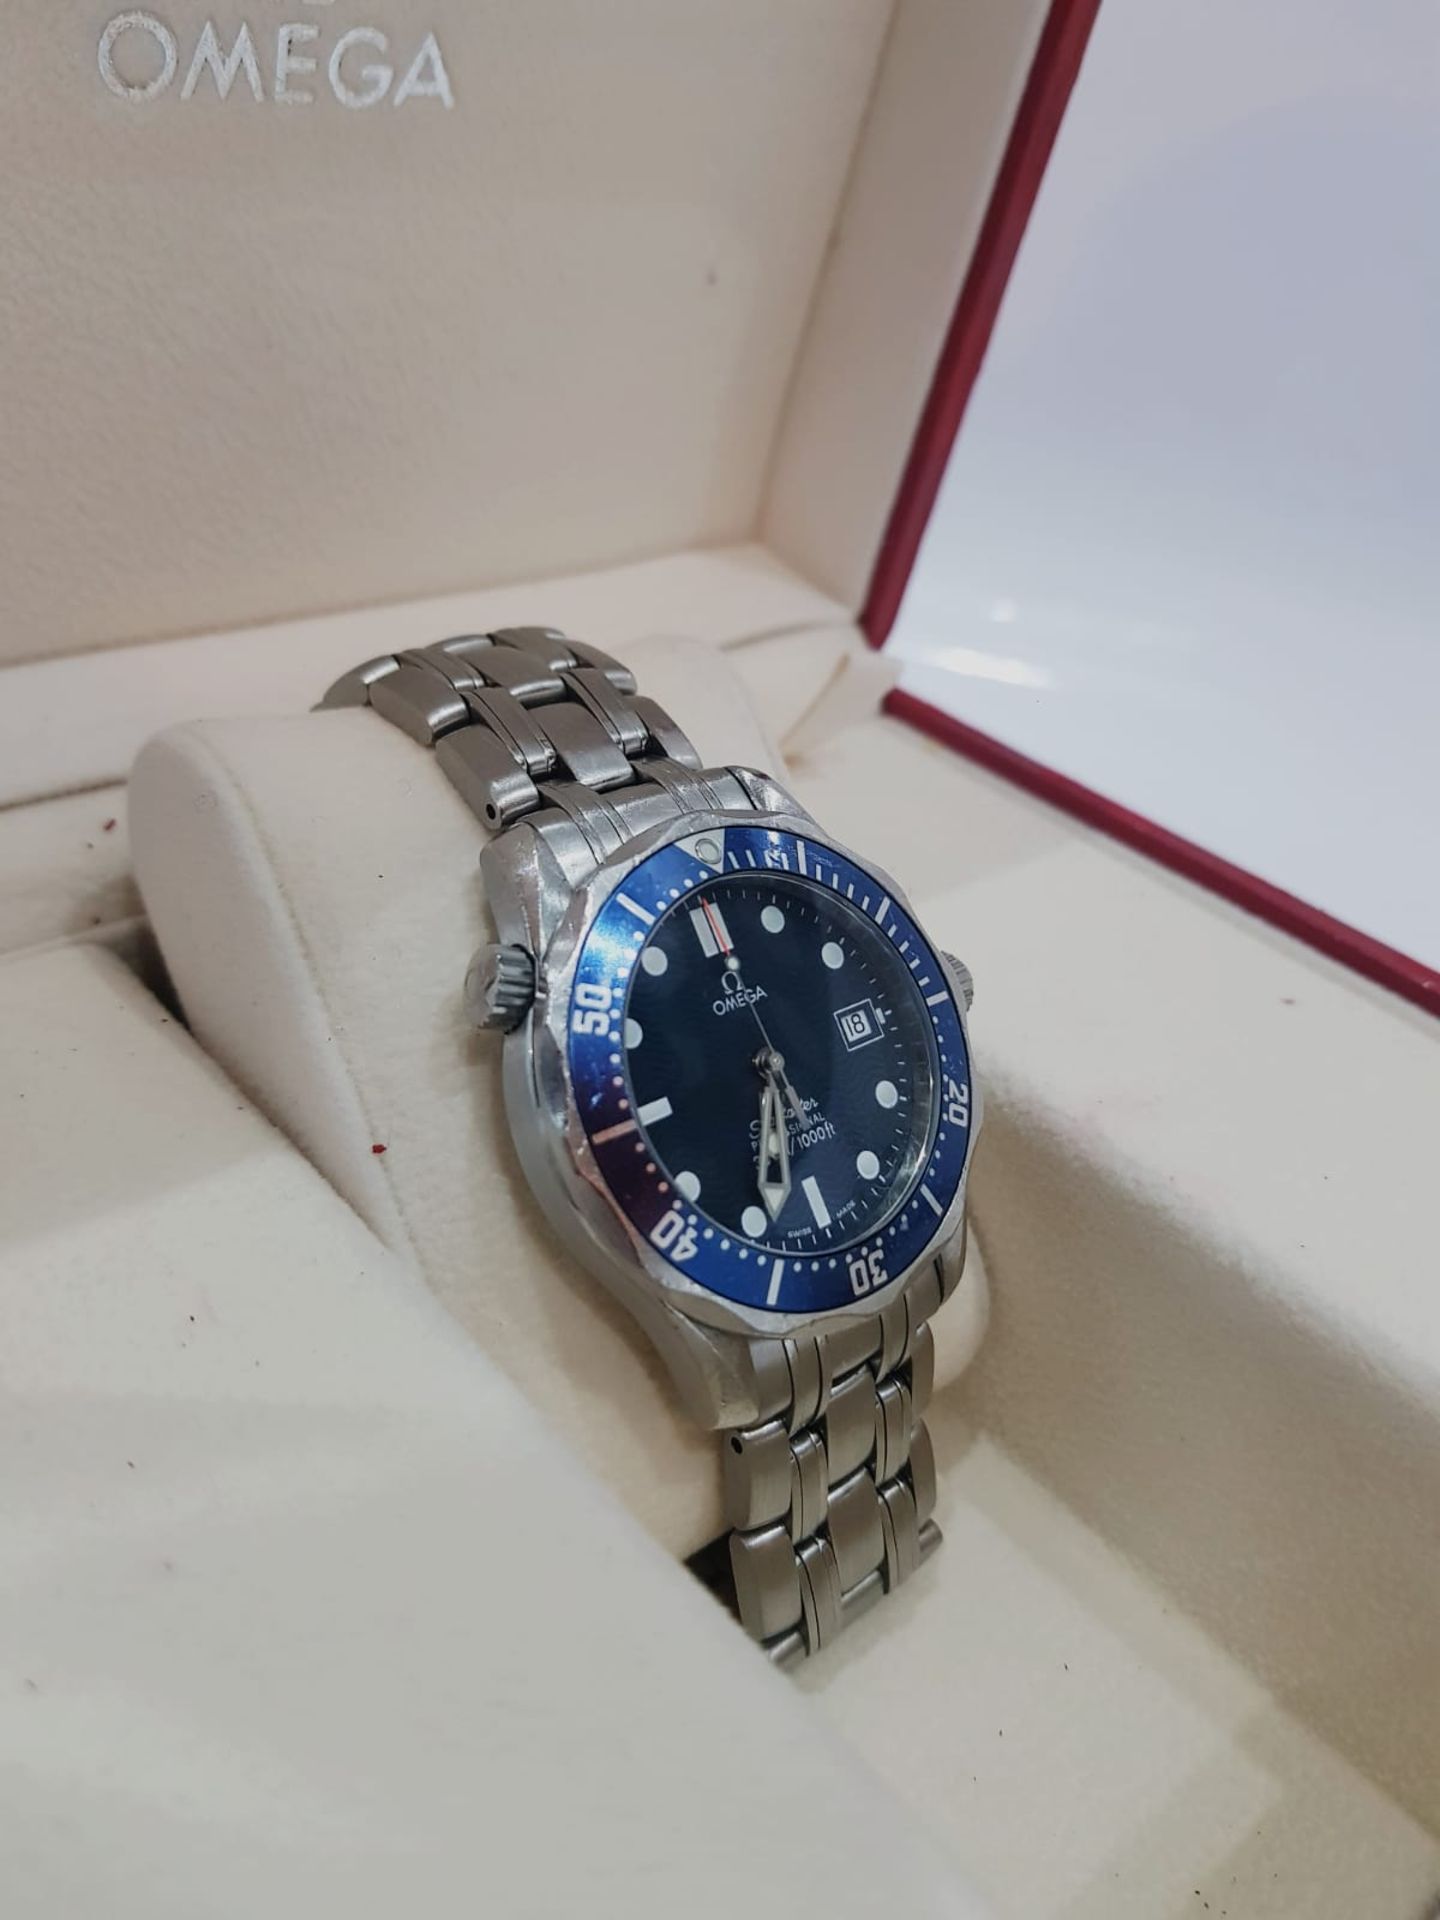 Omega Seamaster Professional 300m Mid Size James Bond Blue Wave Dial Mens Watch - Image 5 of 13